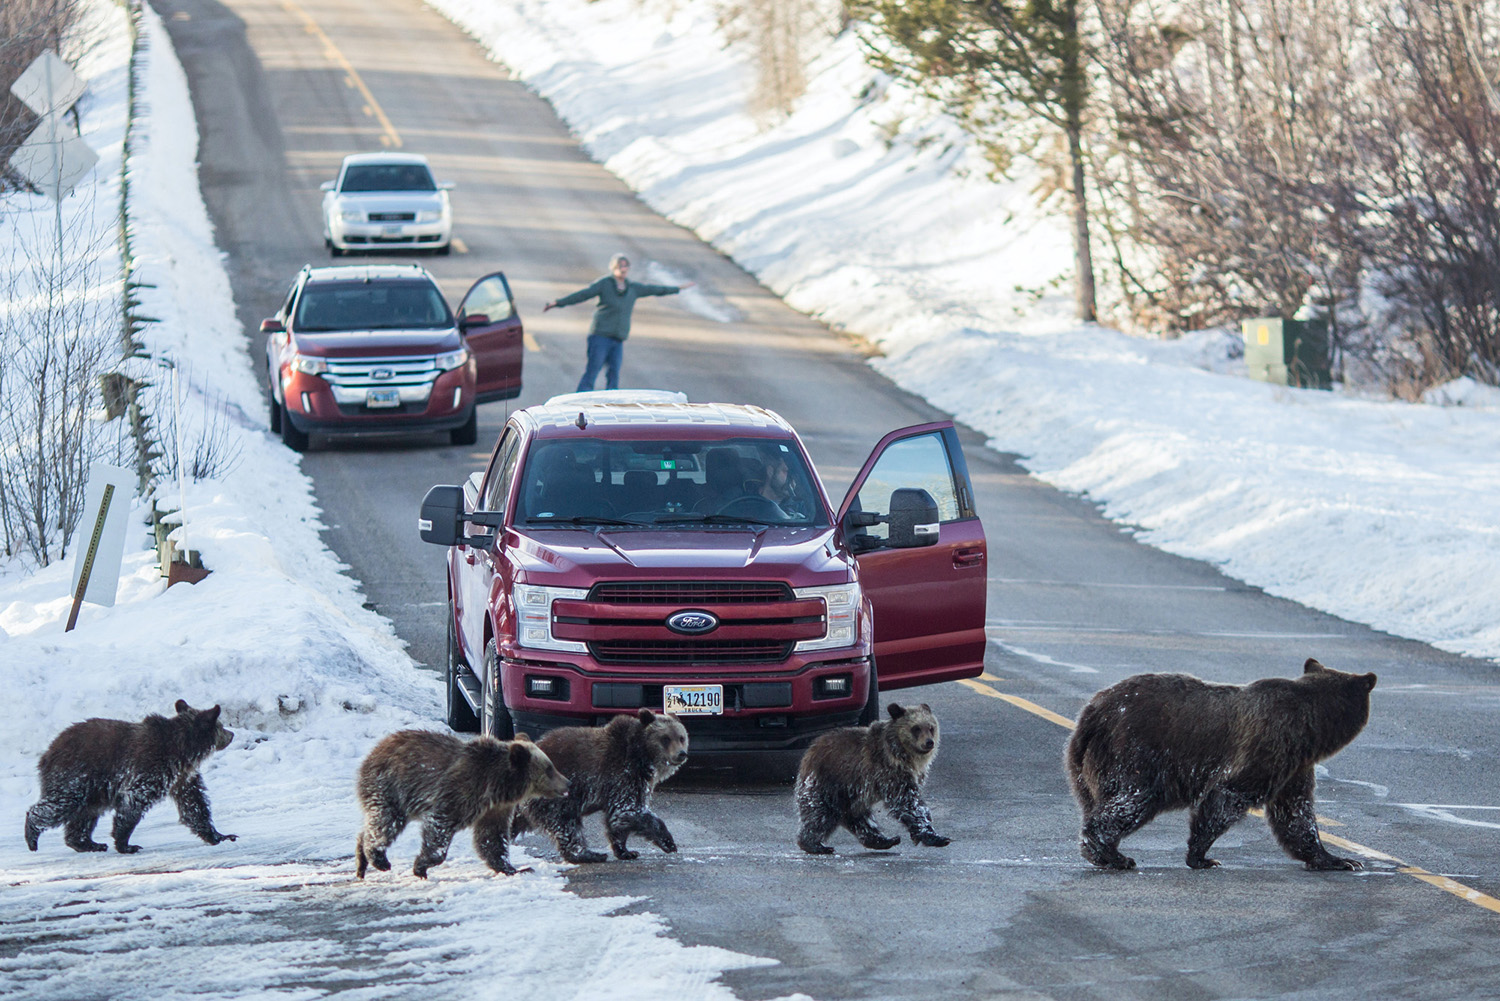 Grizzly 399 crosses the road near while drivers pause and look on.